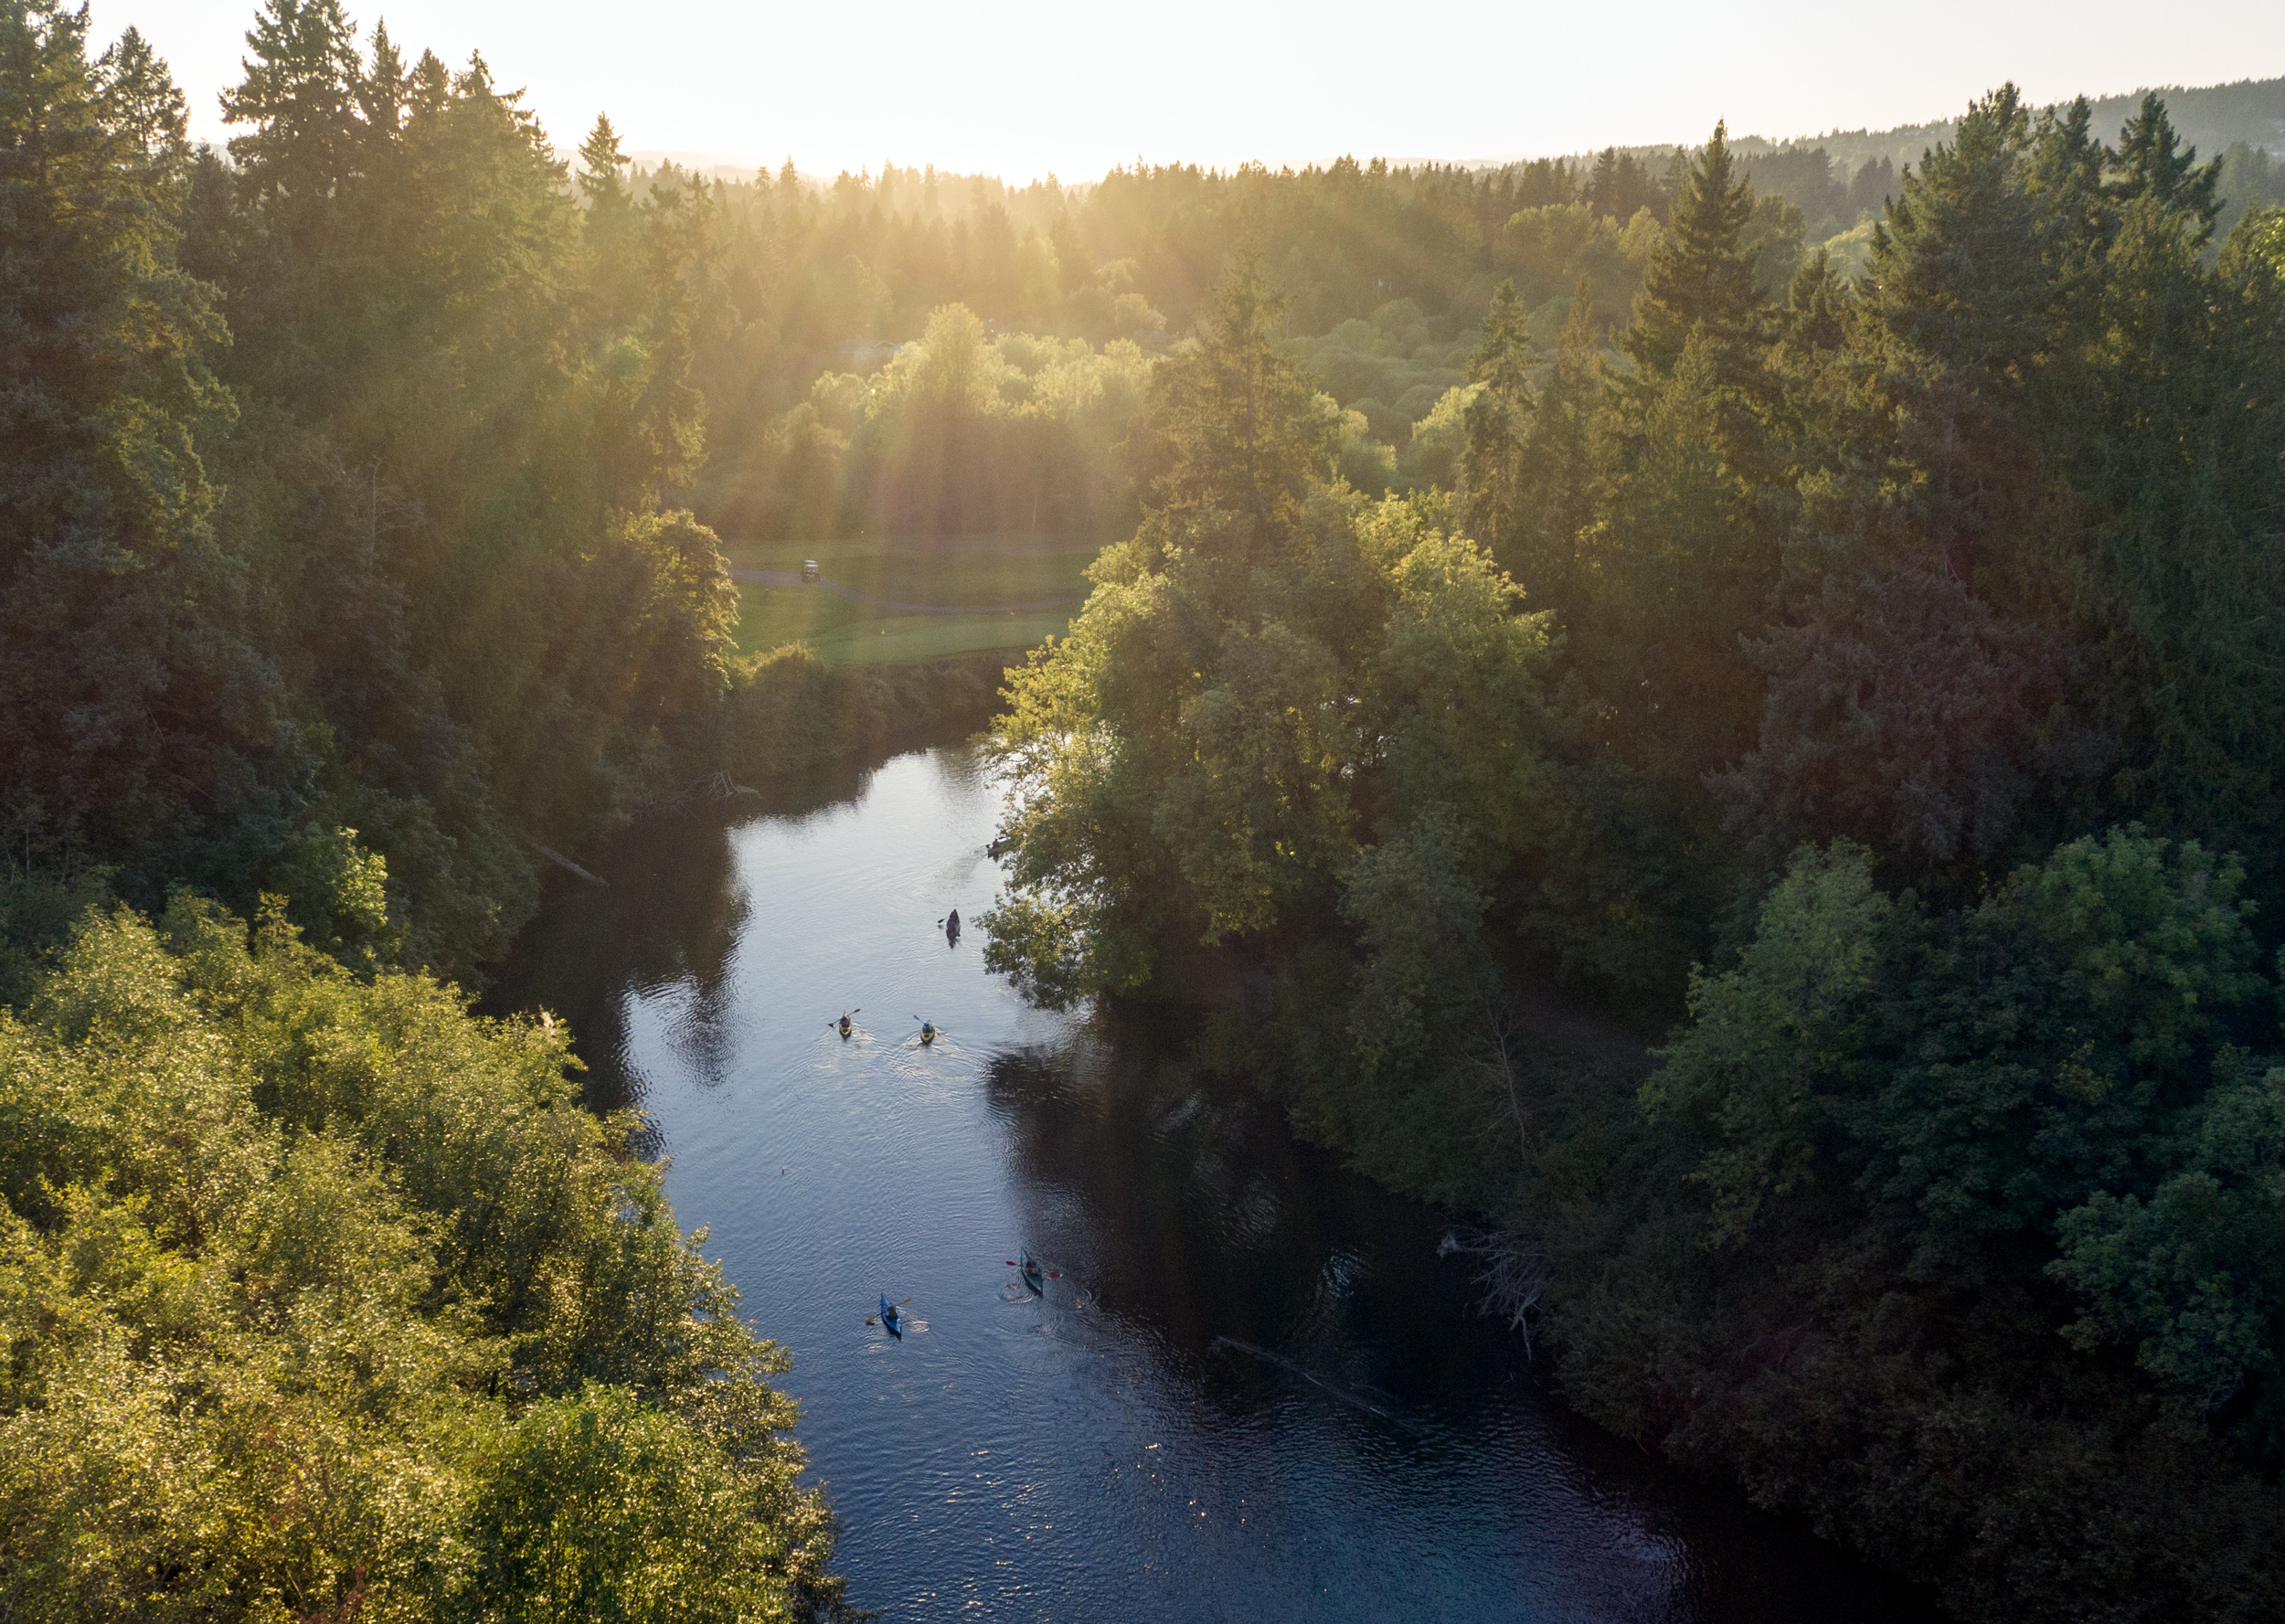 An aerial shot of people kayaking on the Tualatin River in late evening as the sun shines over the trees.